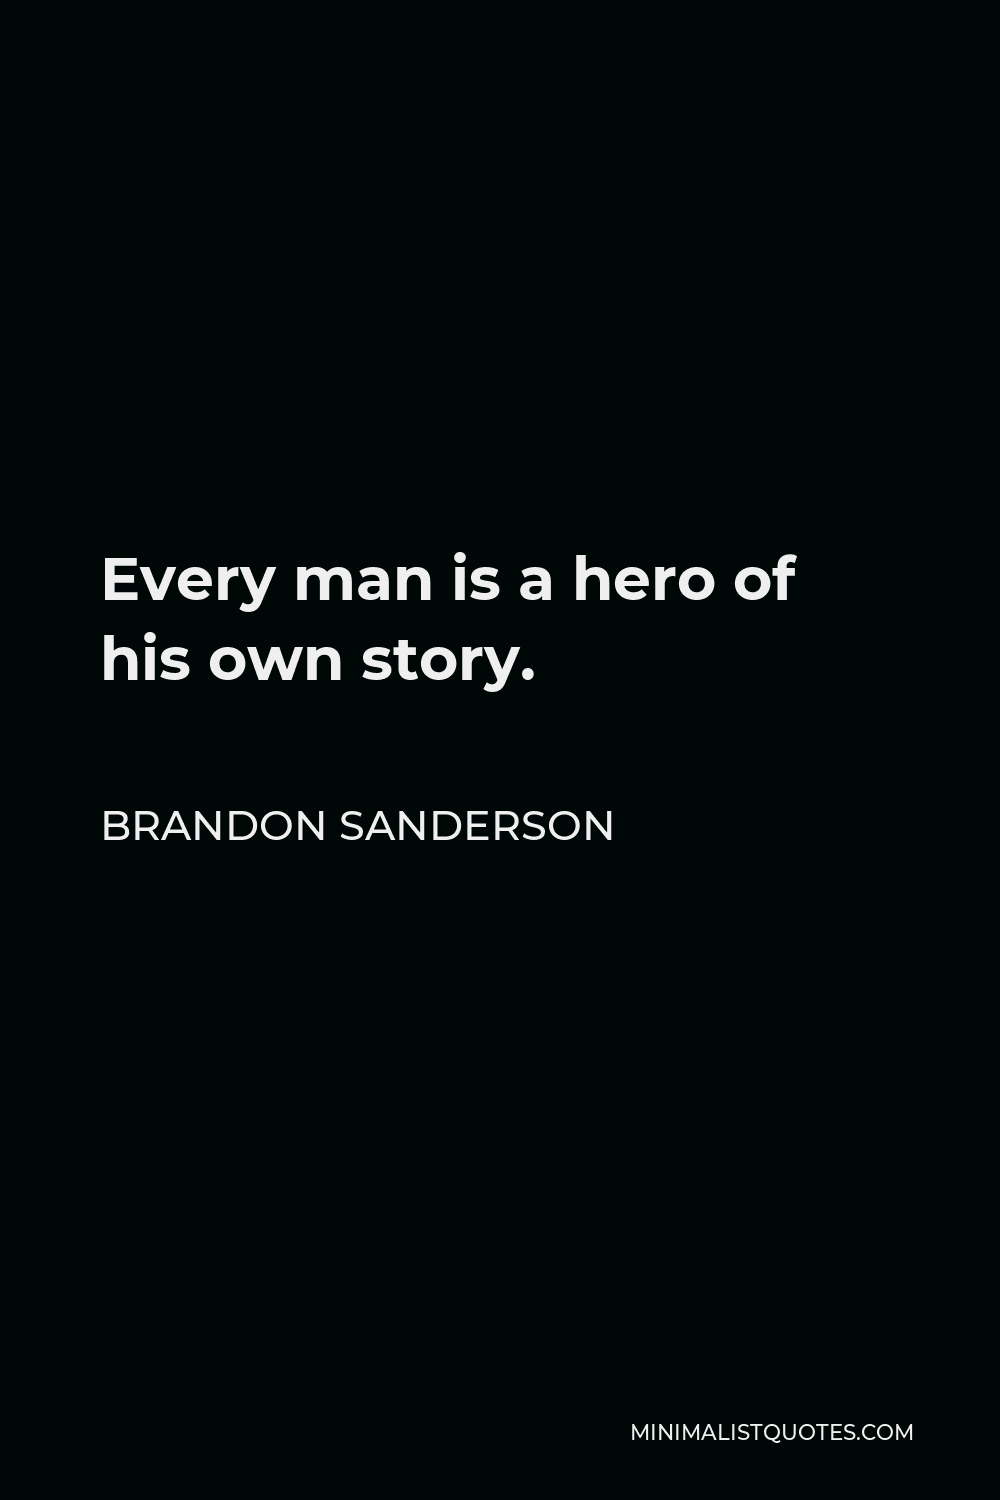 Brandon Sanderson Quote - Every man is a hero of his own story.